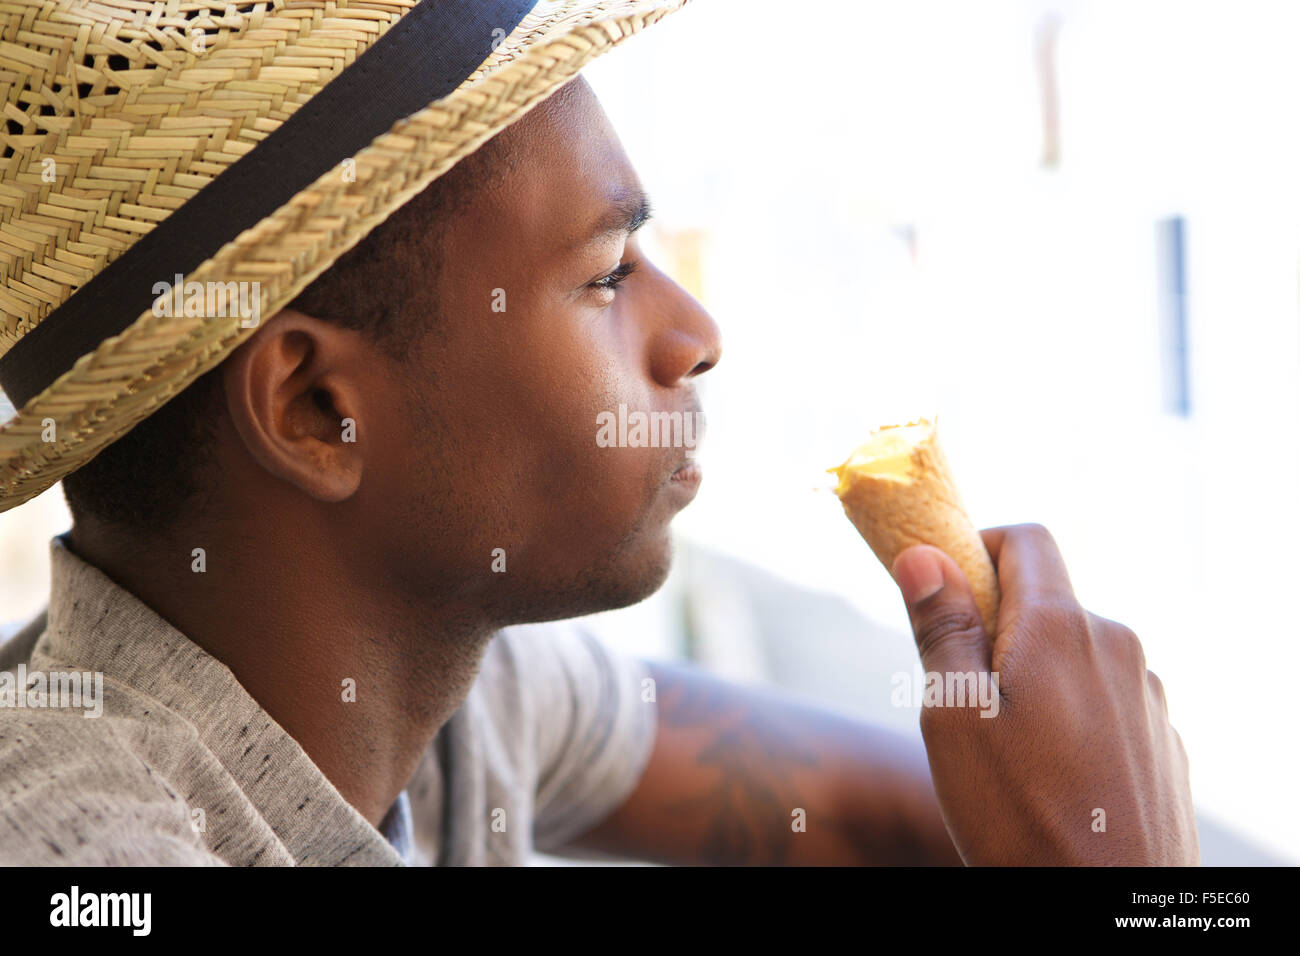 Close up portrait of a young guy with hat eating ice cream Stock Photo